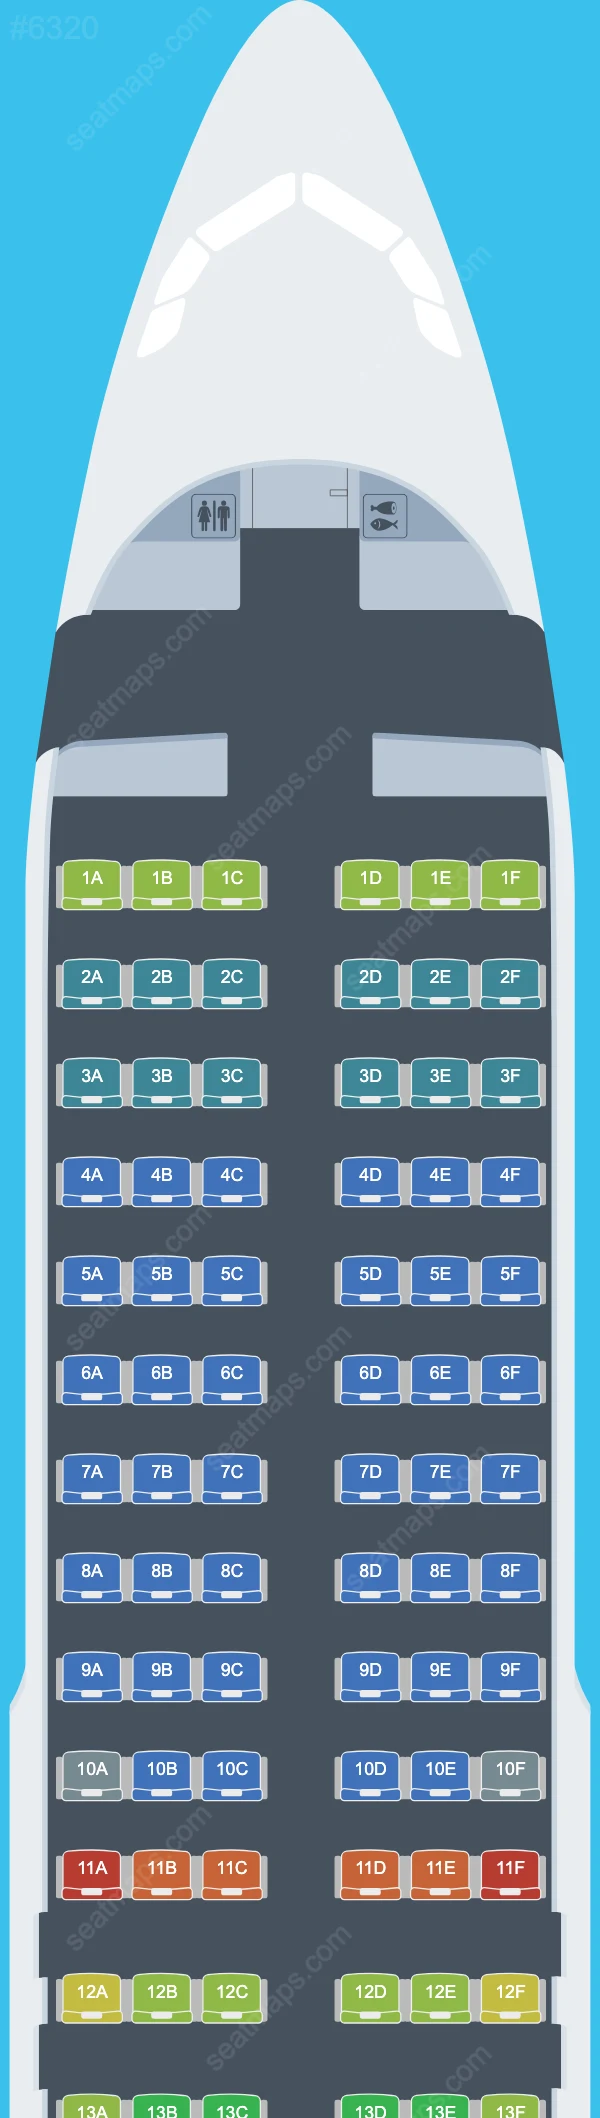 Volaris Airbus A320 Seat Maps A320-200neo